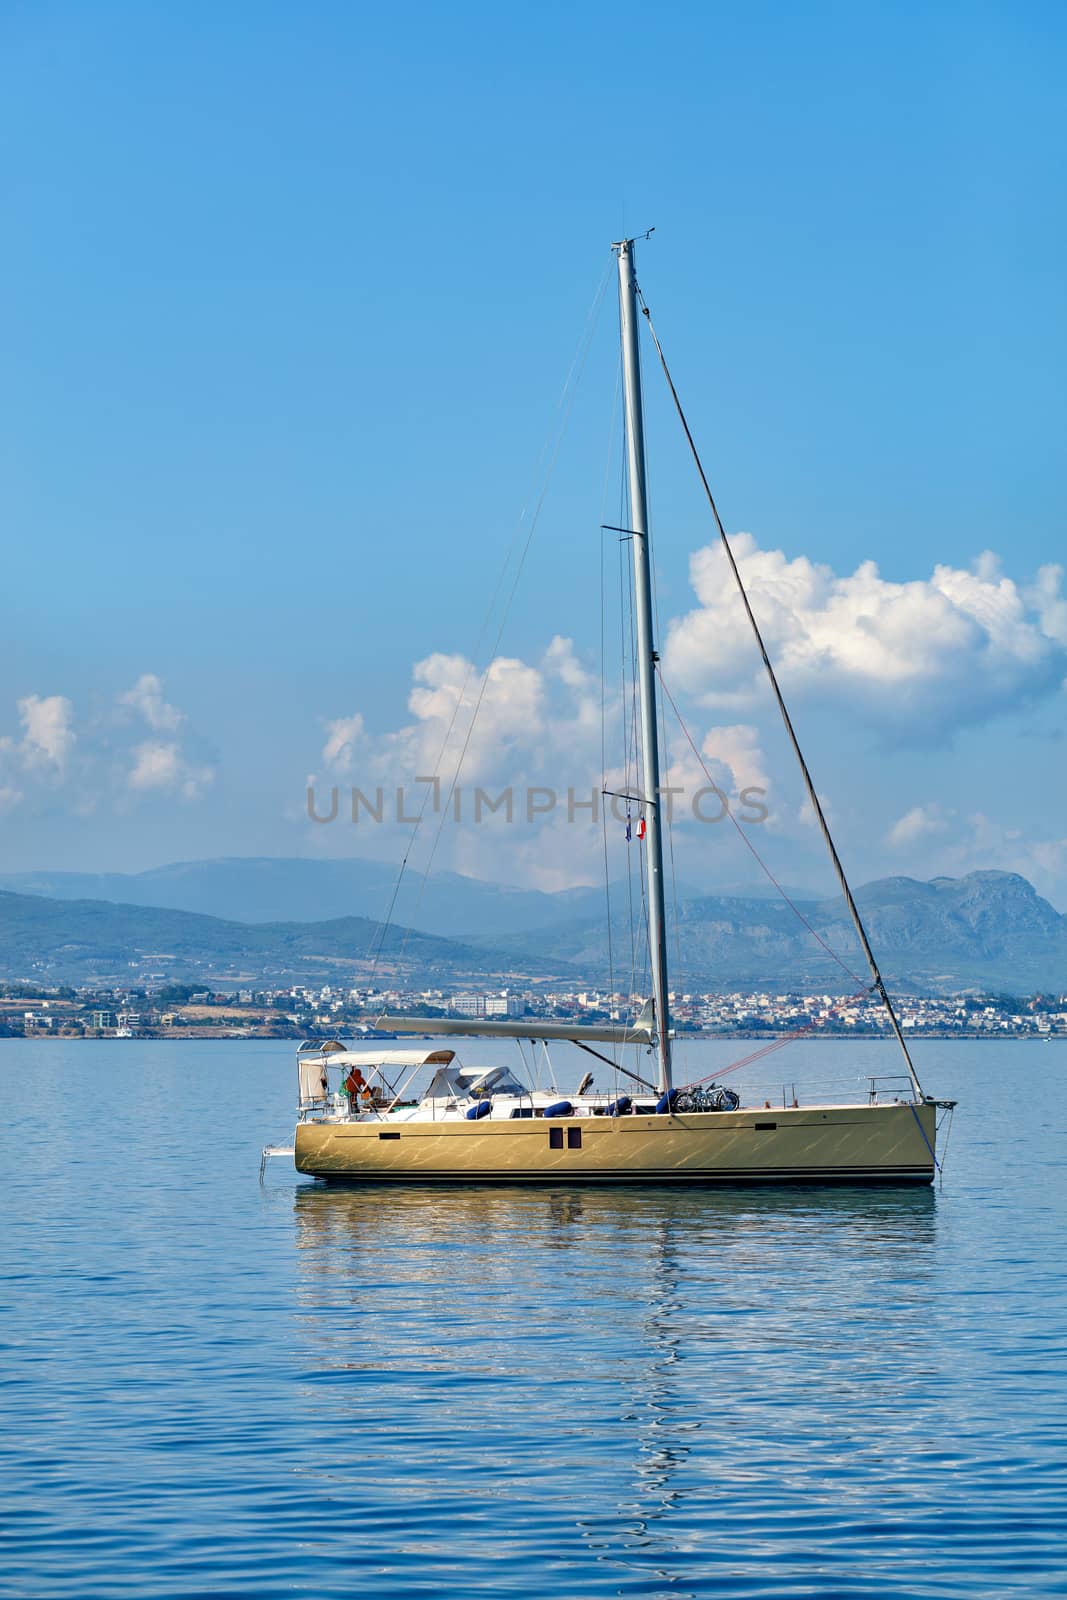 Sailing yacht anchored in the background of mountains and morning haze in the Corinthian bay. by Sergii